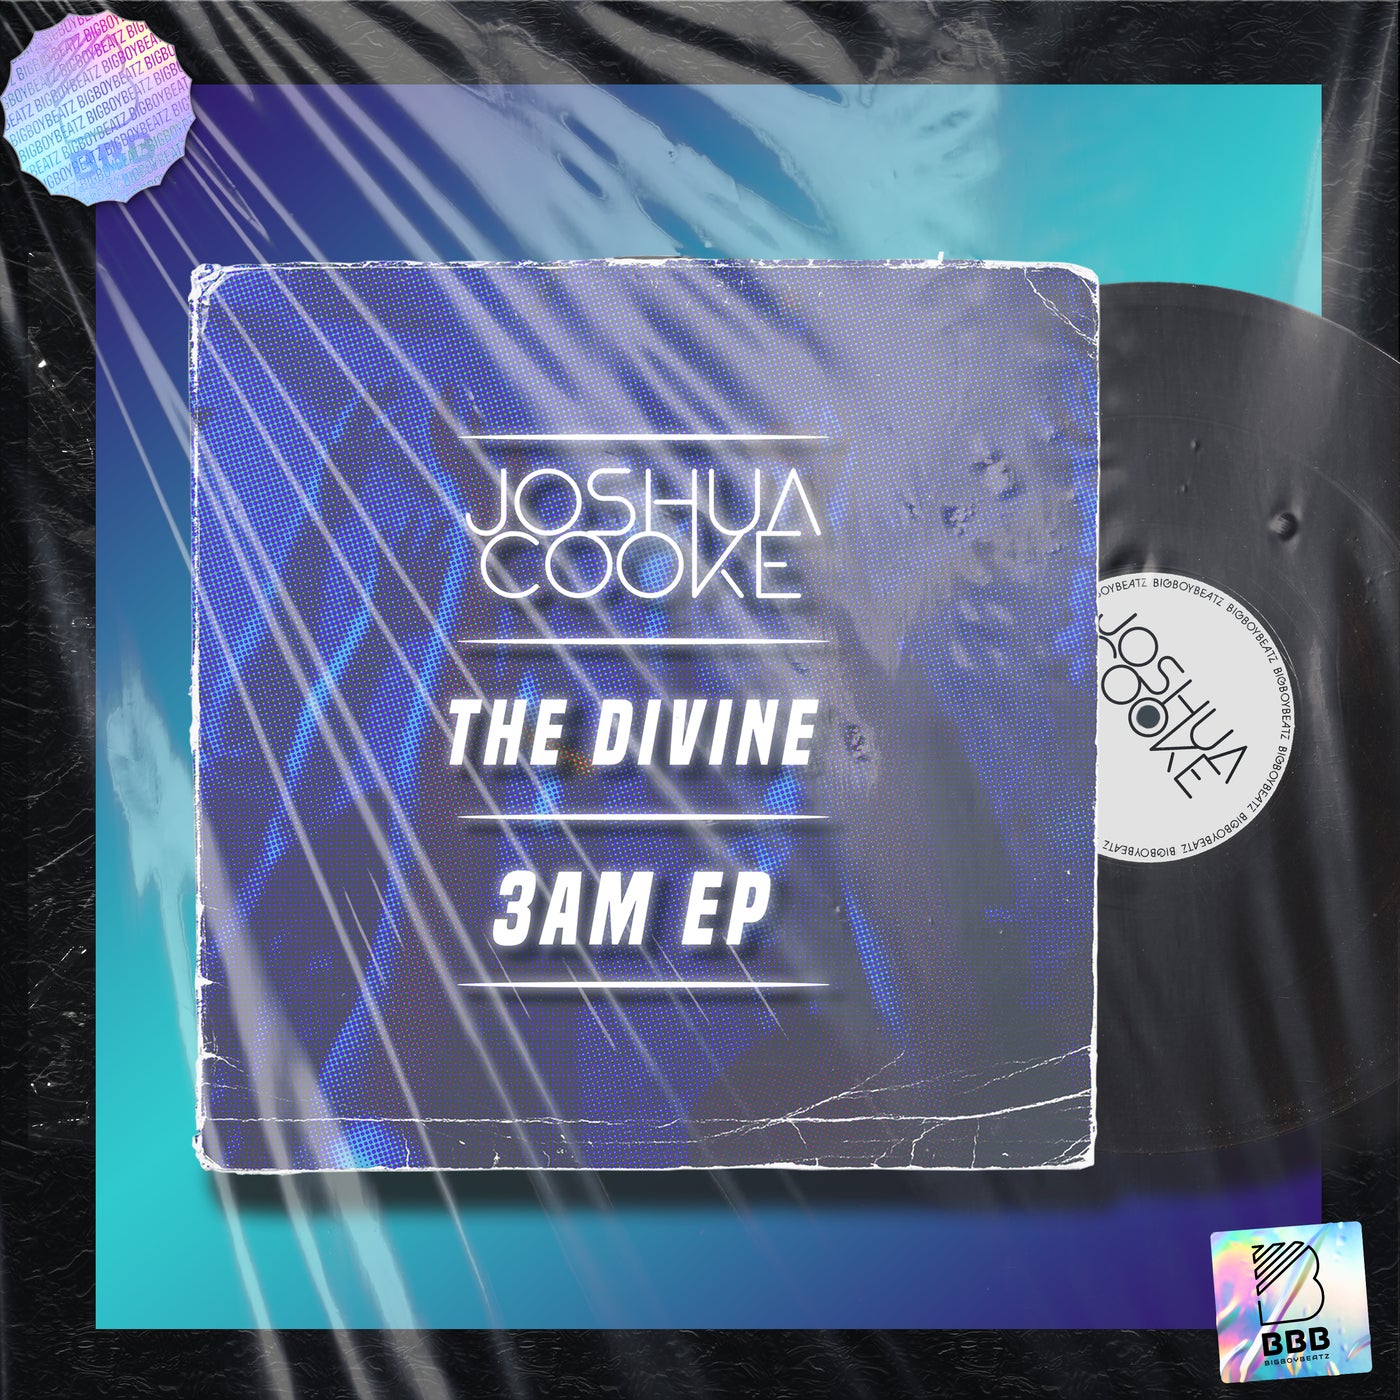 The Divine 3am EP